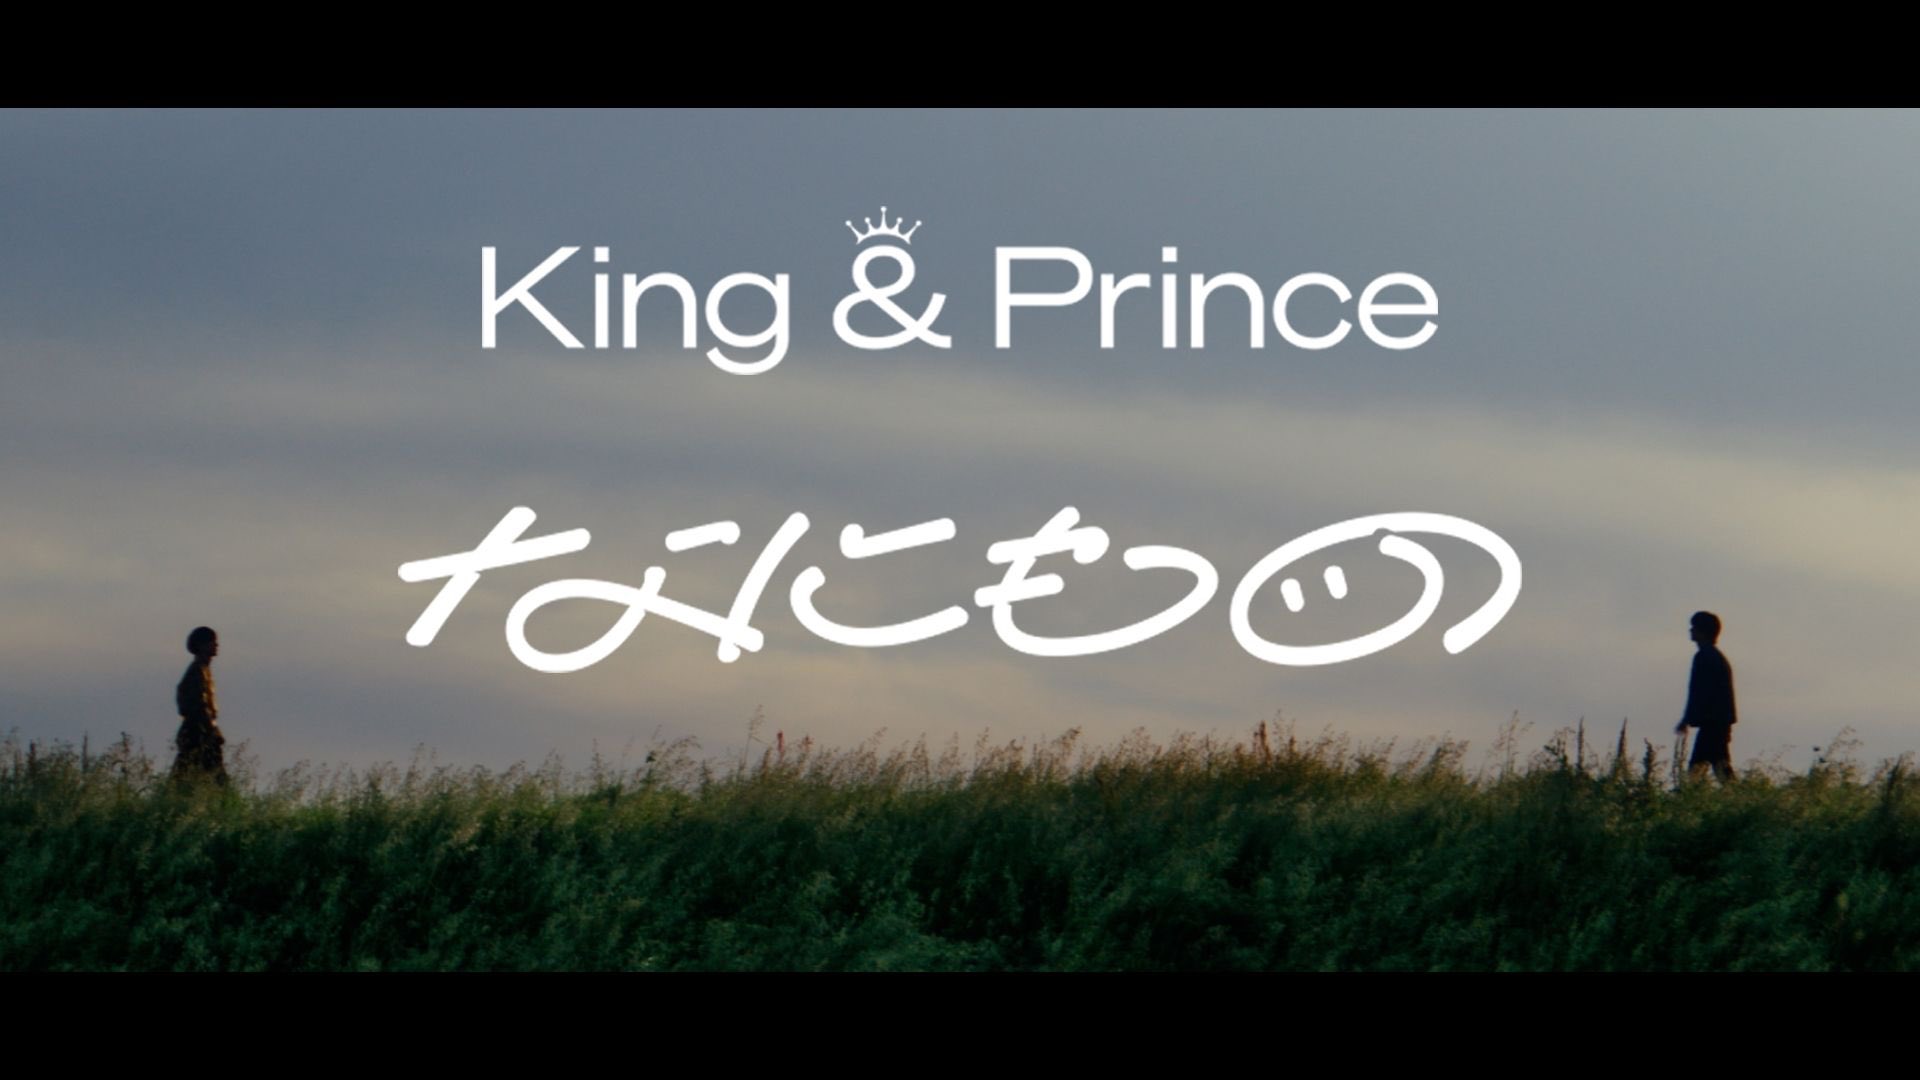 King & Prince on Twitter: 